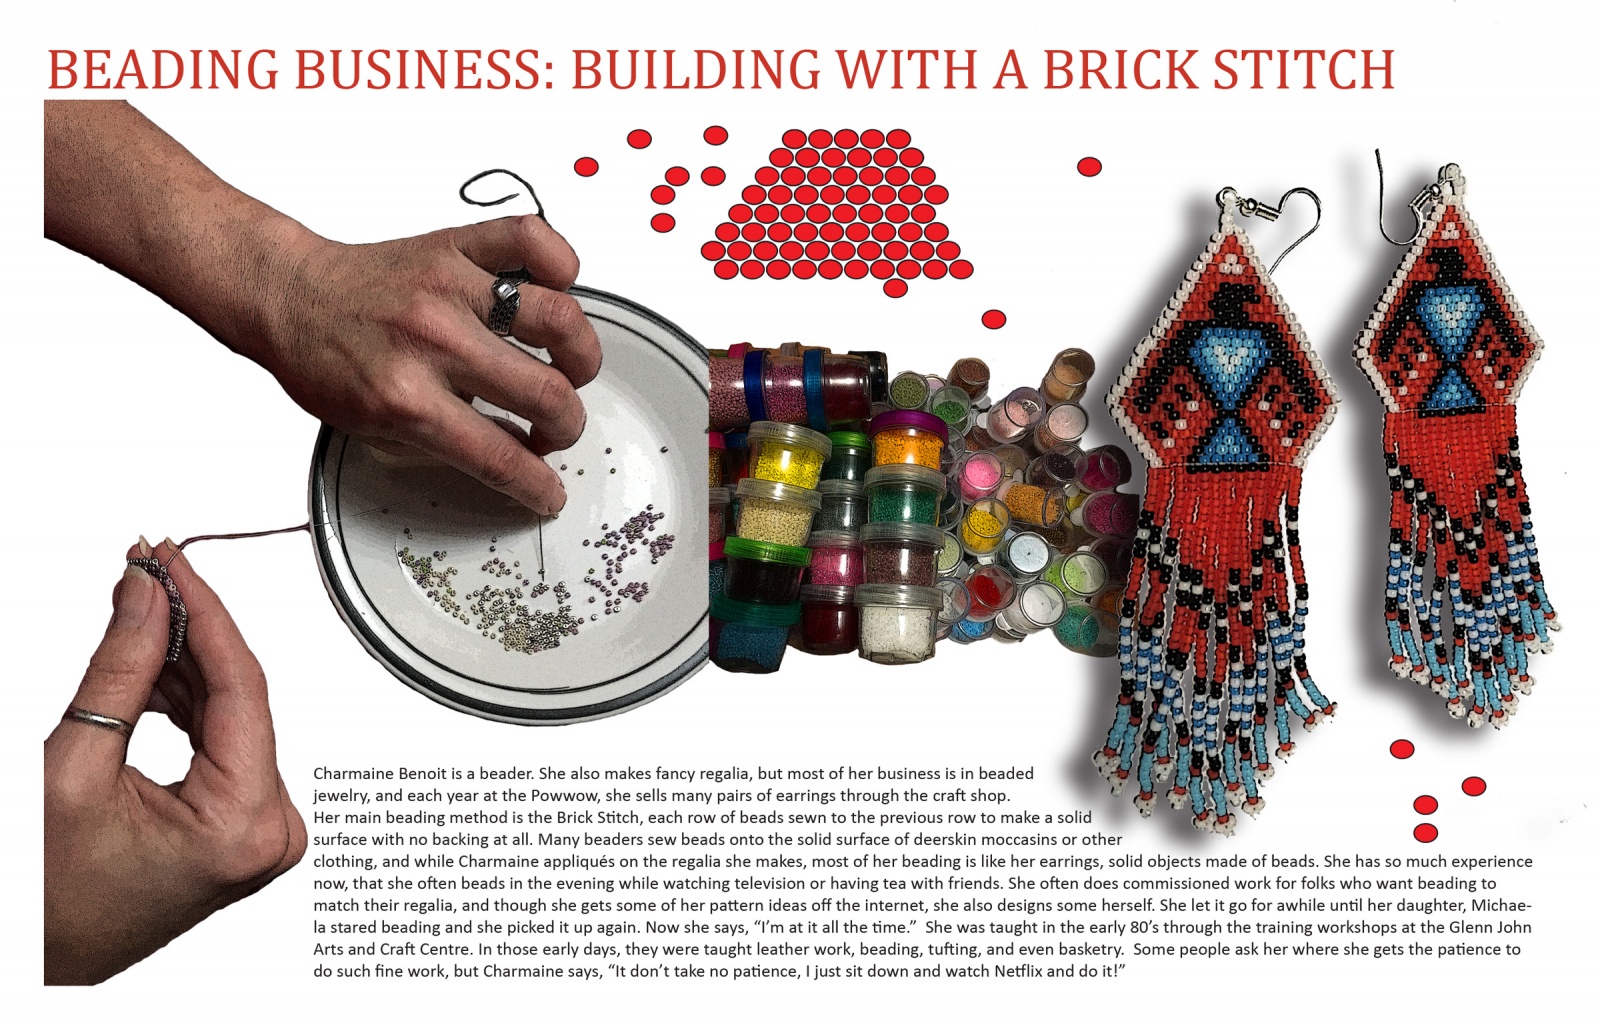 Beading Business: Building with a Brick Stitch